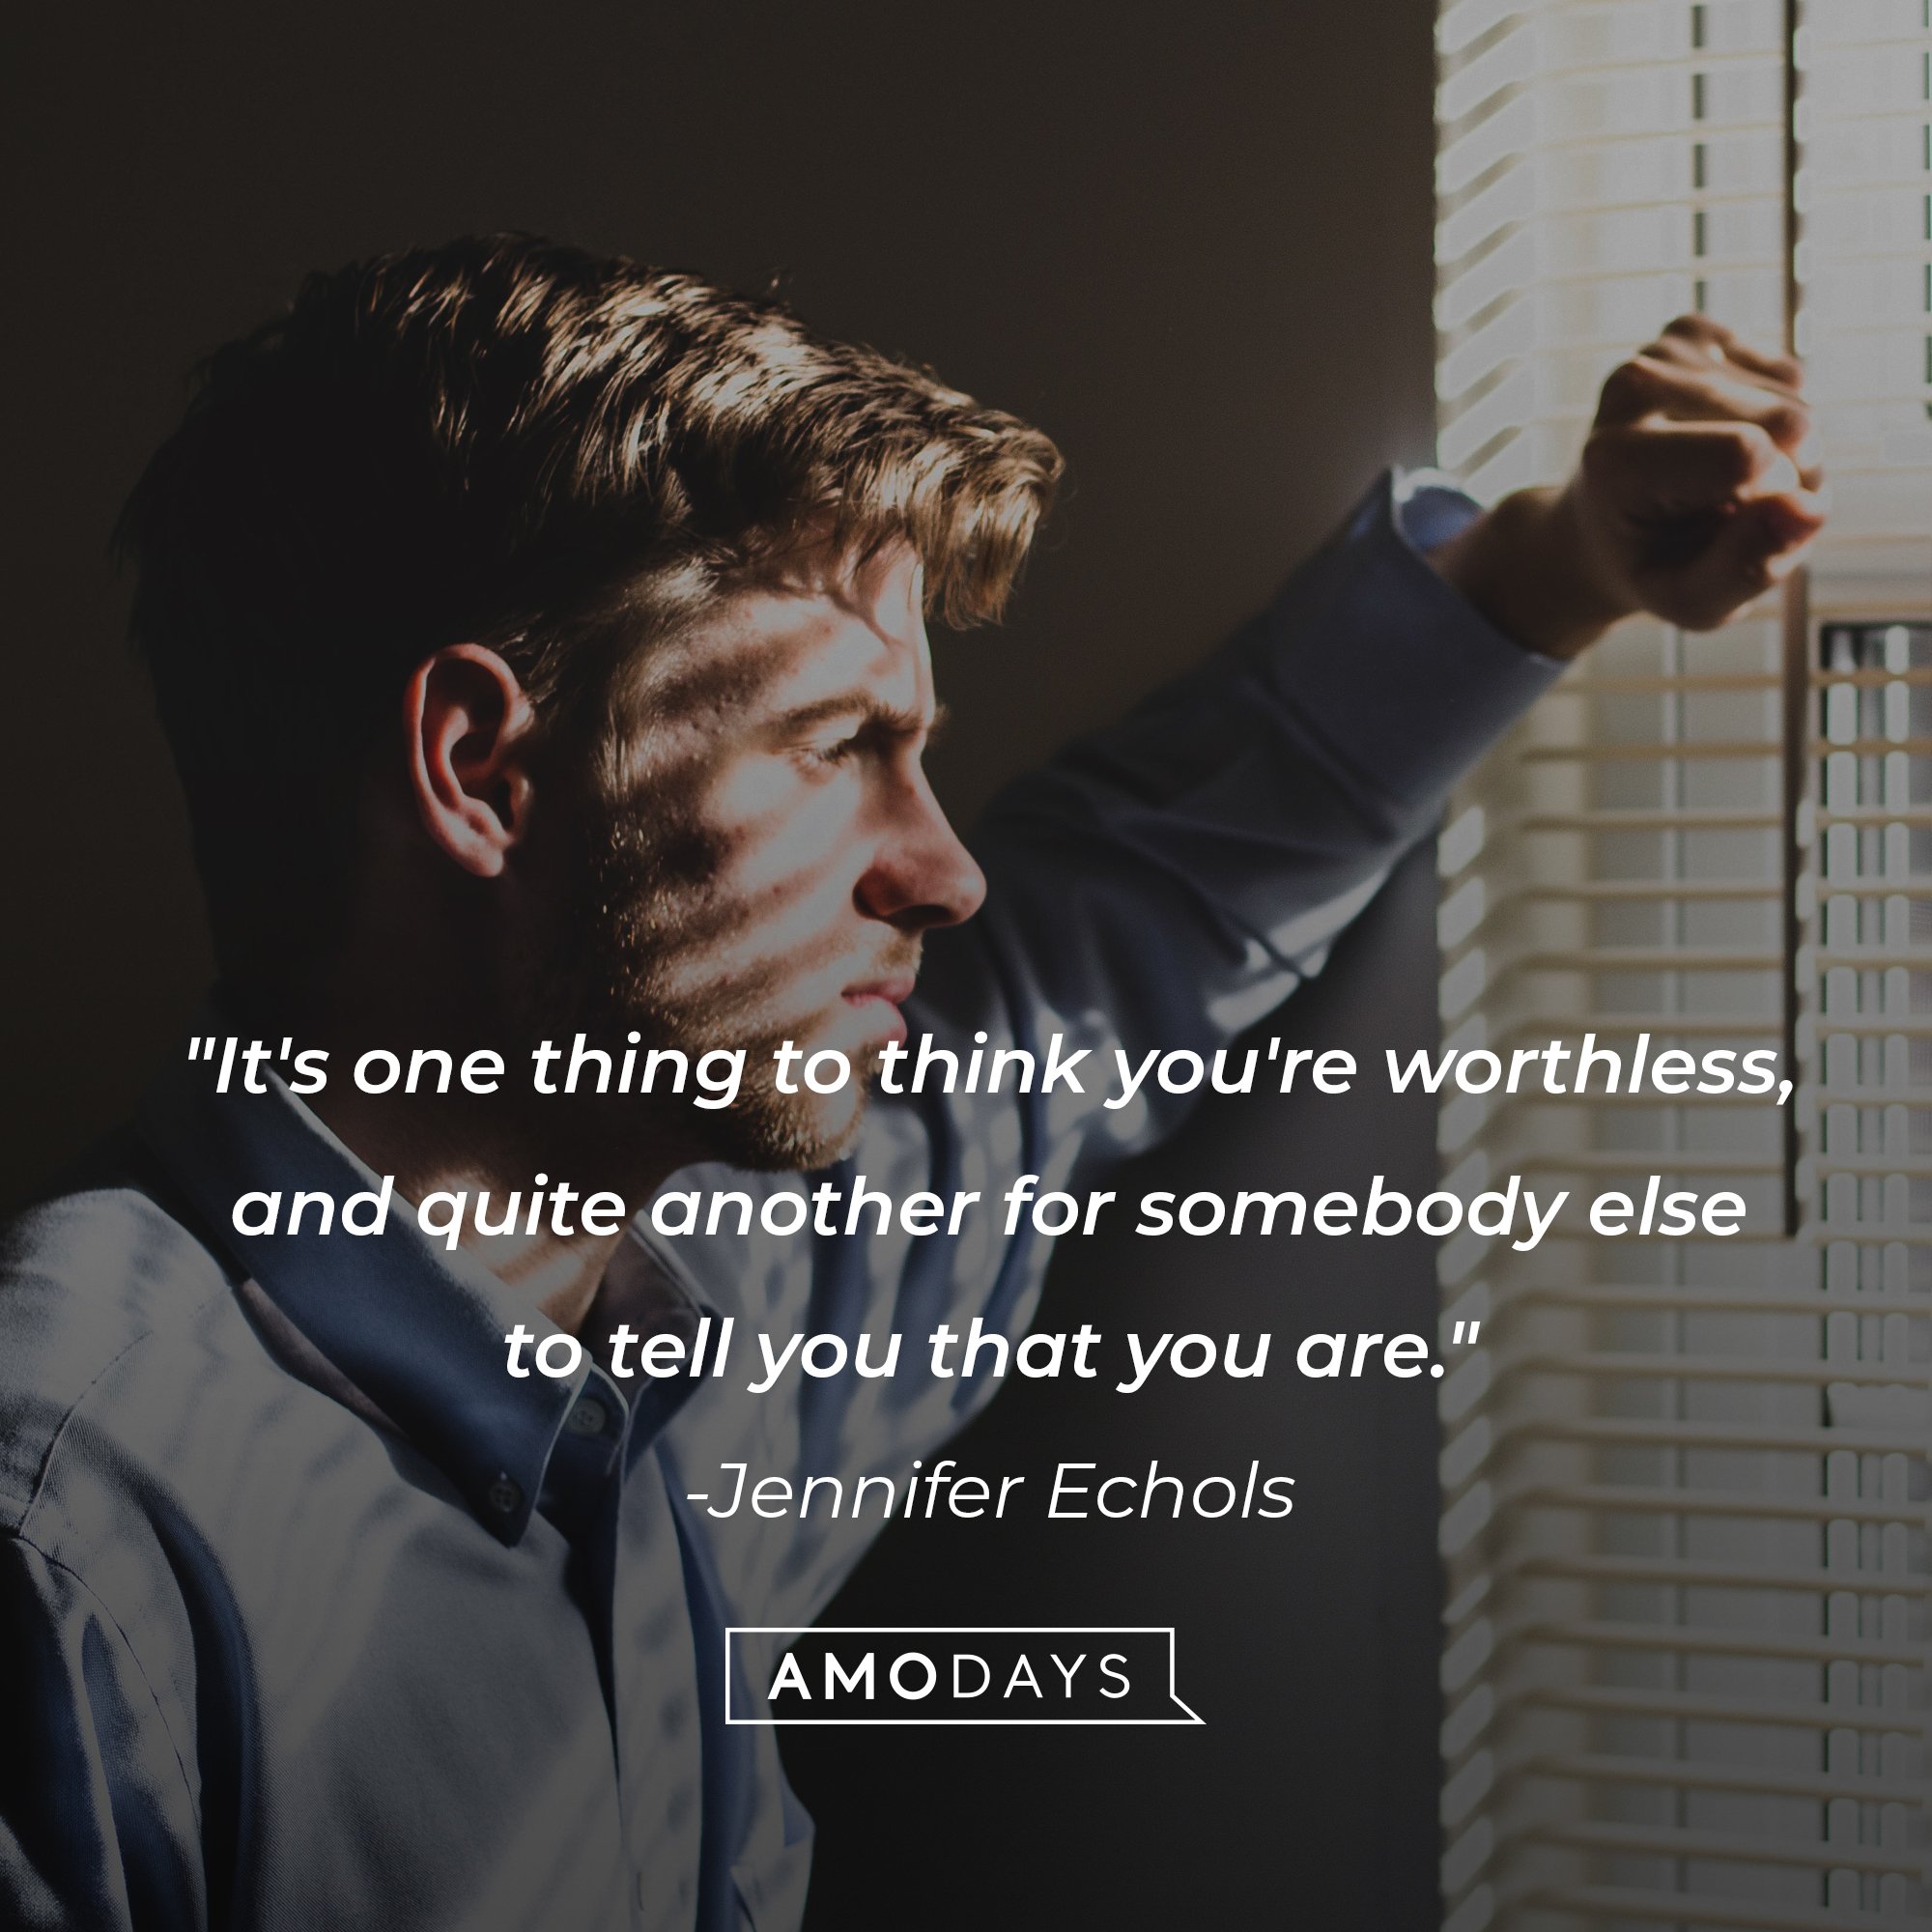 Jennifer Echols' quote: "It's one thing to think you're worthless, and quite another for somebody else to tell you that you are." | Image: AmoDays